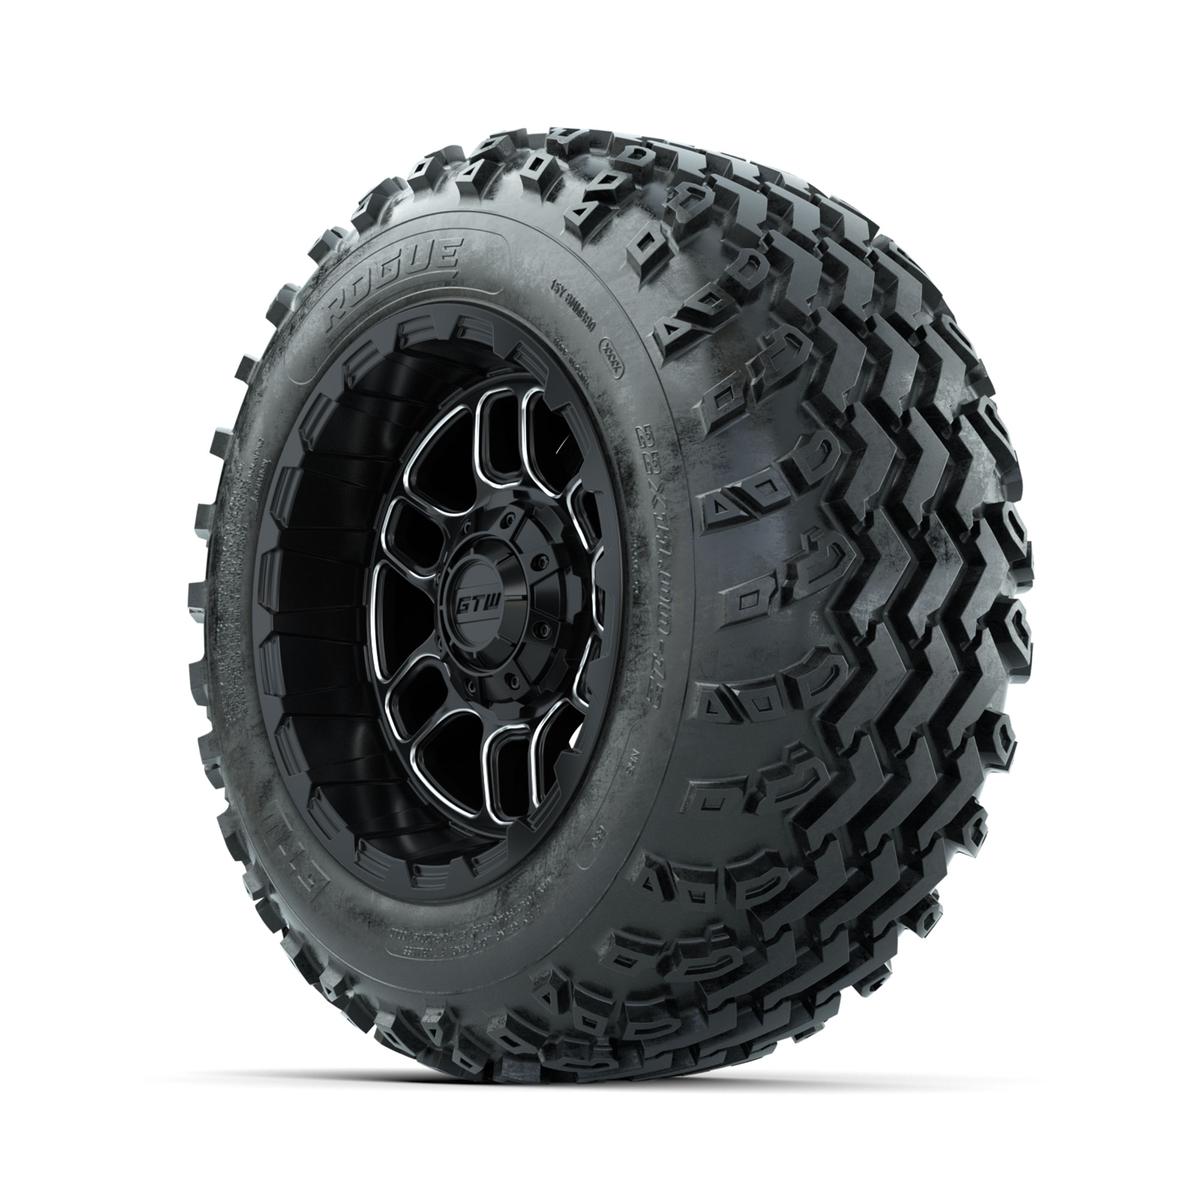 GTW Titan Machined/Black 12 in Wheels with 22x11.00-12 Rogue All Terrain Tires – Full Set